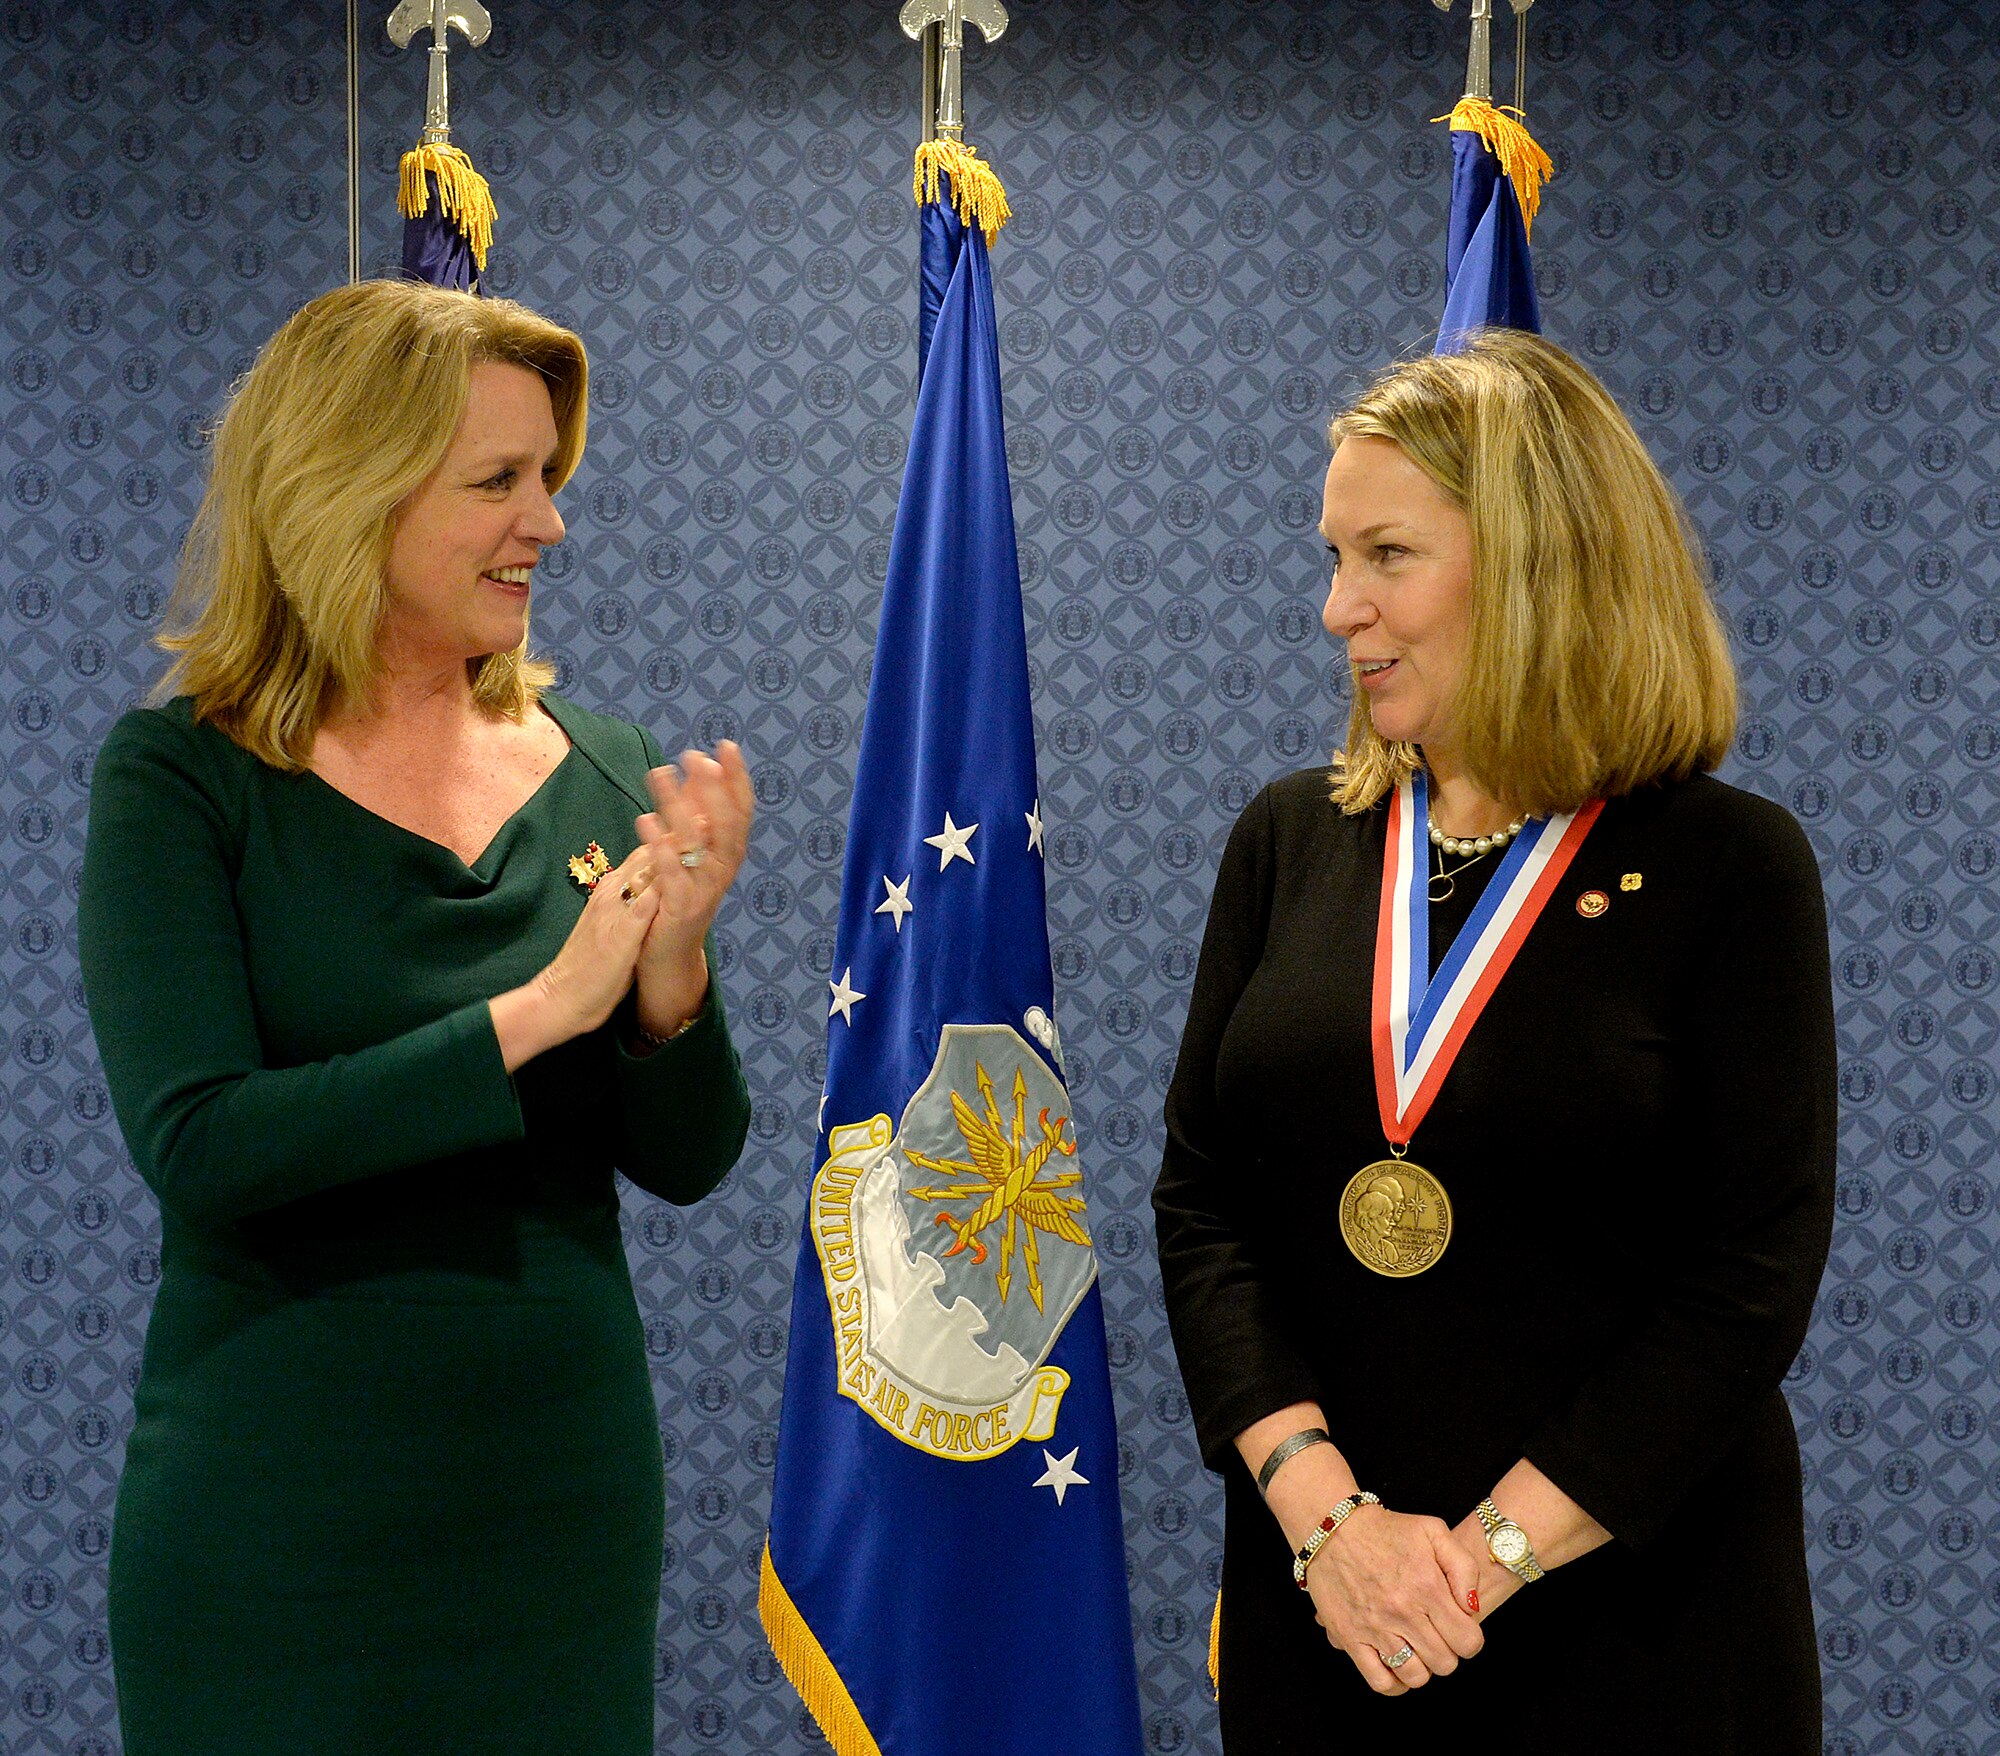 Secretary of the Air Force Deborah Lee James congratulates Bonnie Carroll, the founder and president of the Tragedy Assistance Program for Survivors, during a ceremony honoring Carroll with the Zachary and Elizabeth Fisher Distinguished Civilian Humanitarian Award in the Pentagon, Dec. 1, 2015. (U.S. Air Force photo/Scott M. Ash)